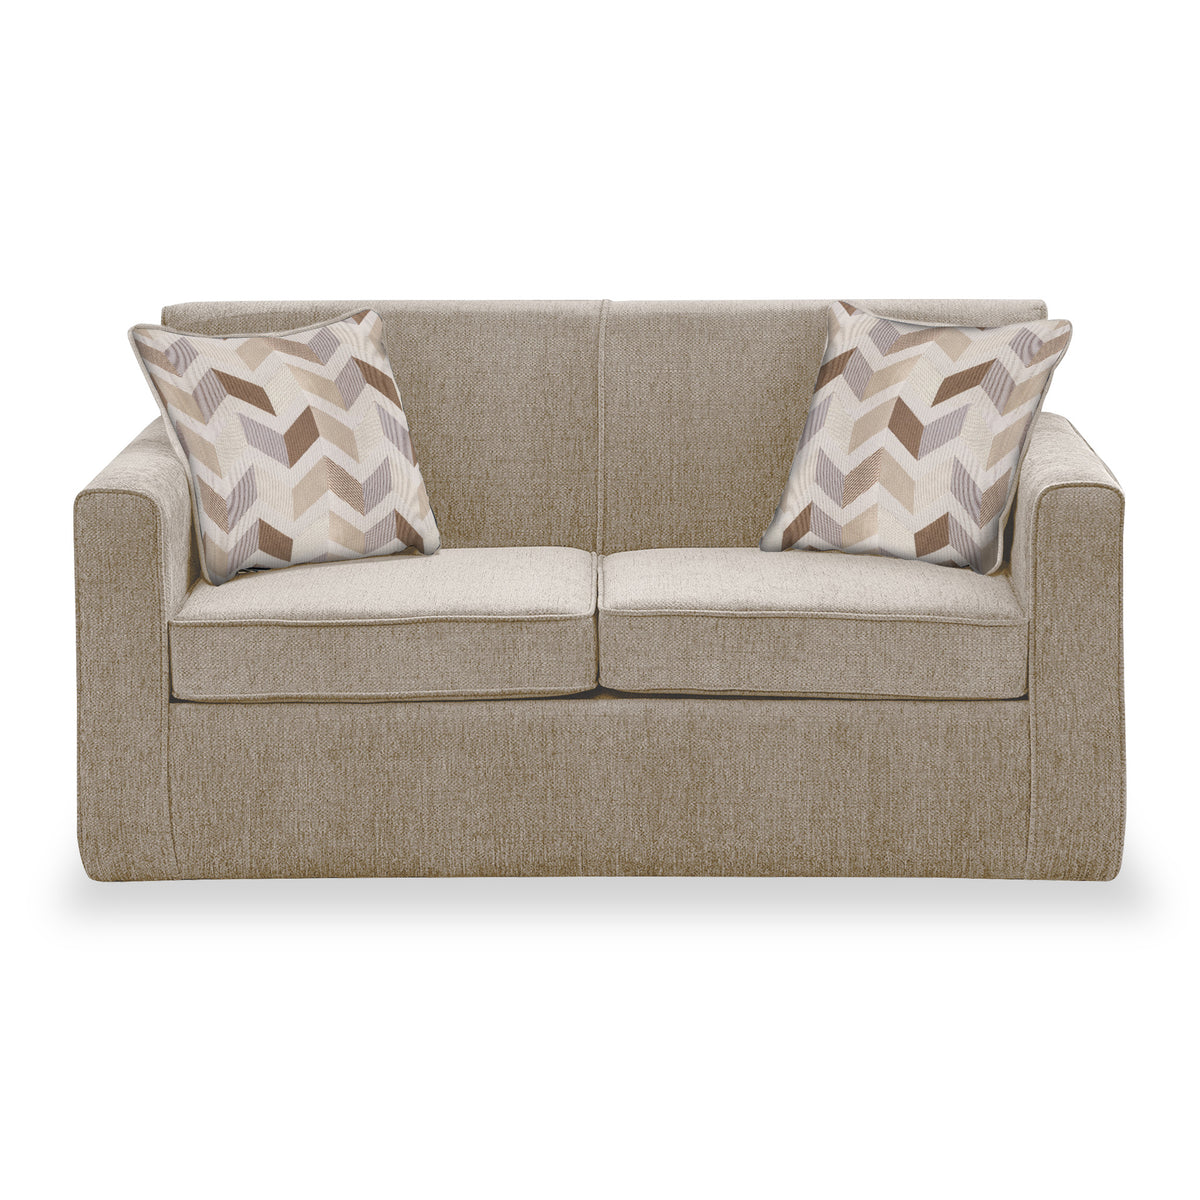 Welton Fawn Soft Weave 2 Seater Sofa Bed with Morelisa Oatmeal Cushions